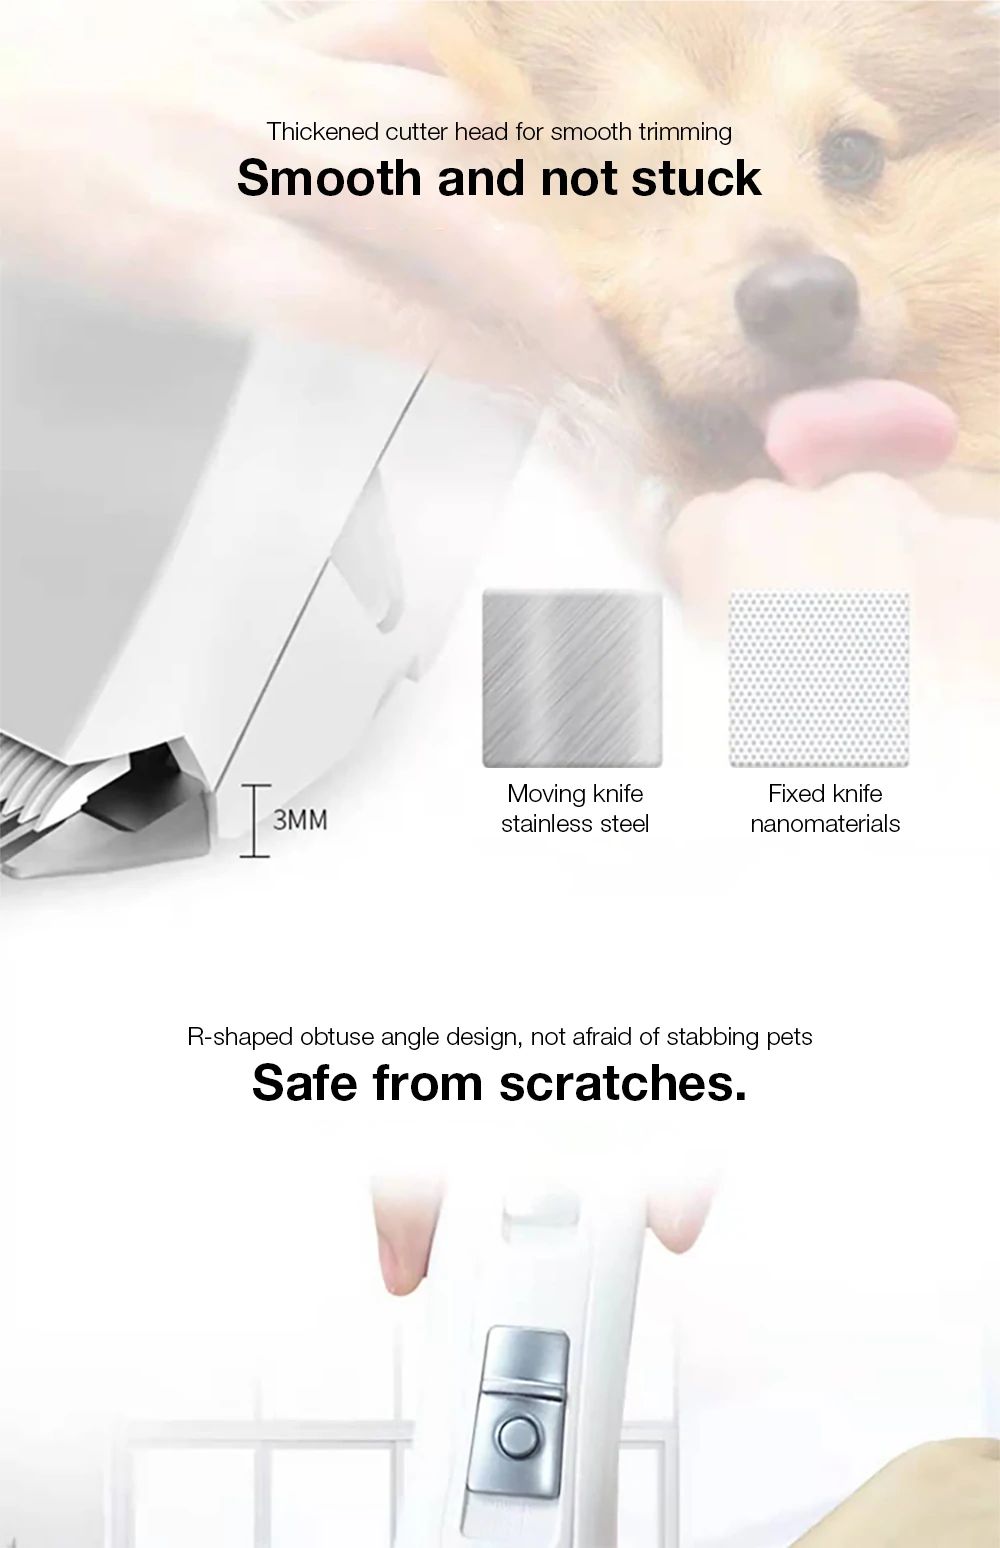 XIAOMI YOUPIN JASE PC-902 Dog Hair Clipper Trimmer USB Charging Grooming Electric Scissors Shaver Pet Supplies